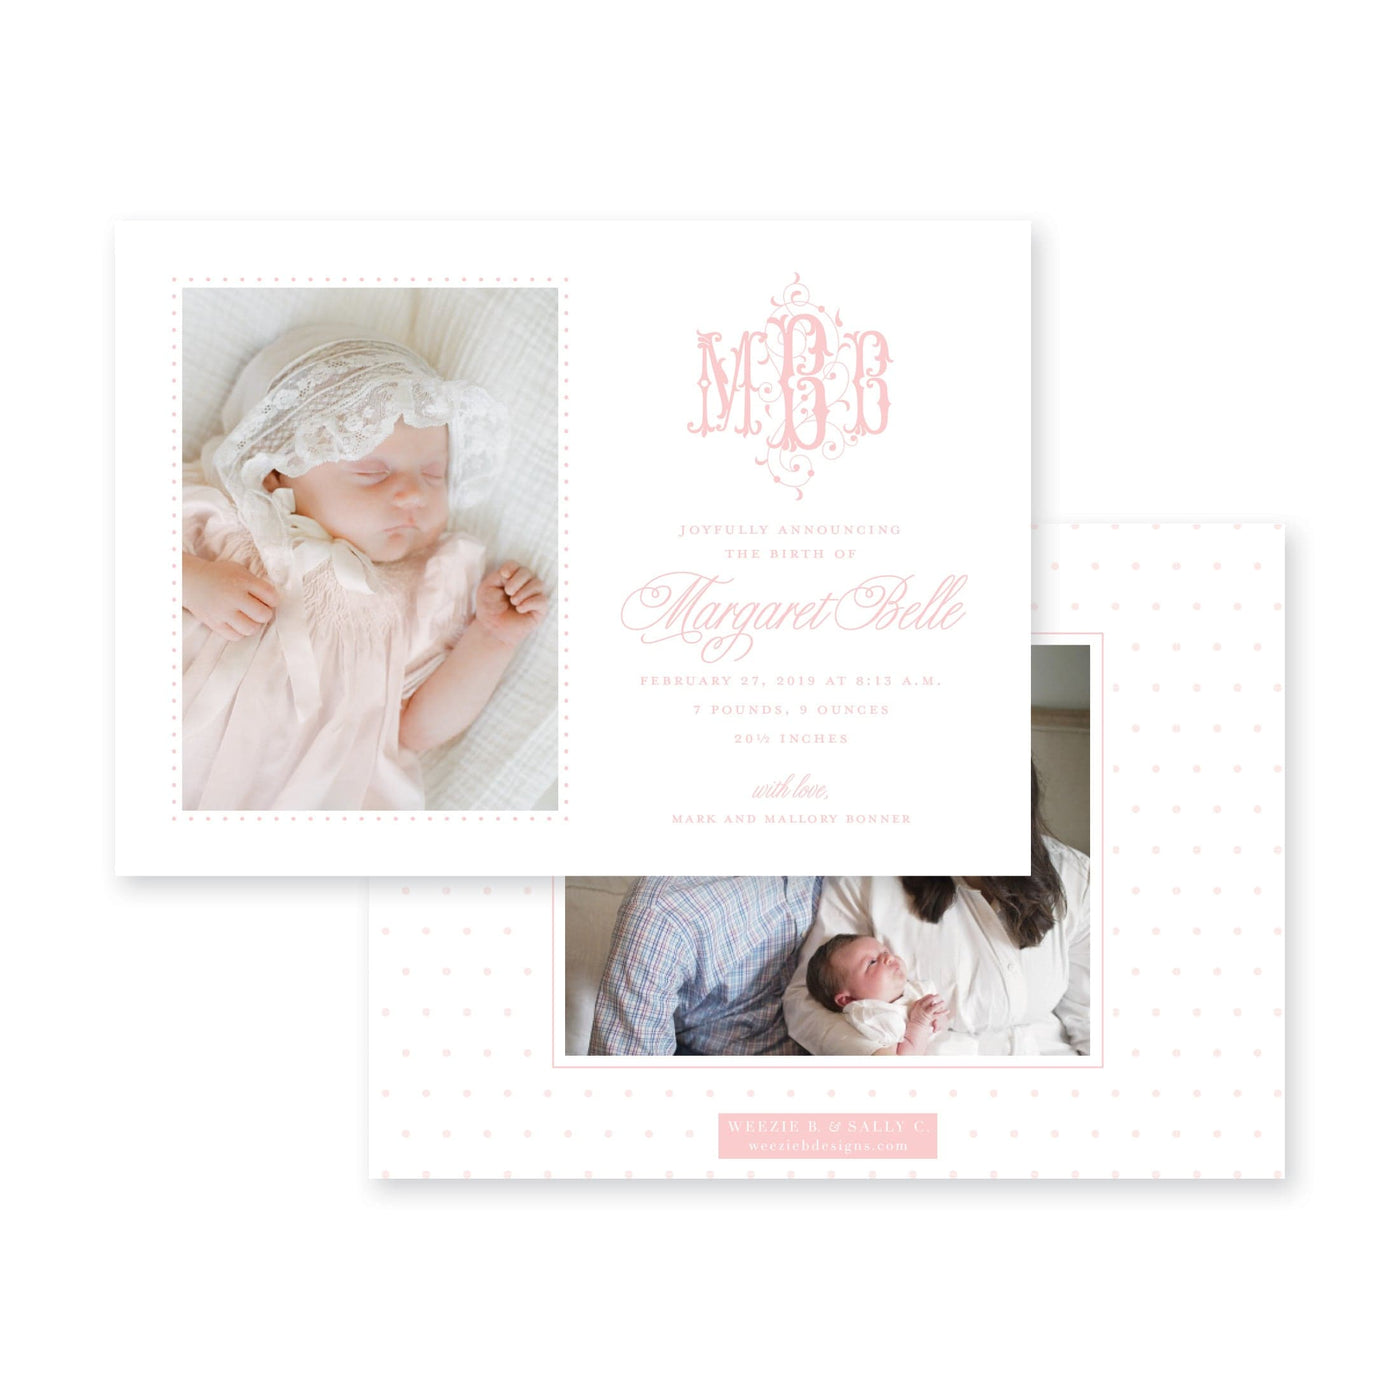 Weezie B. Designs | Fanciful Birth Announcement